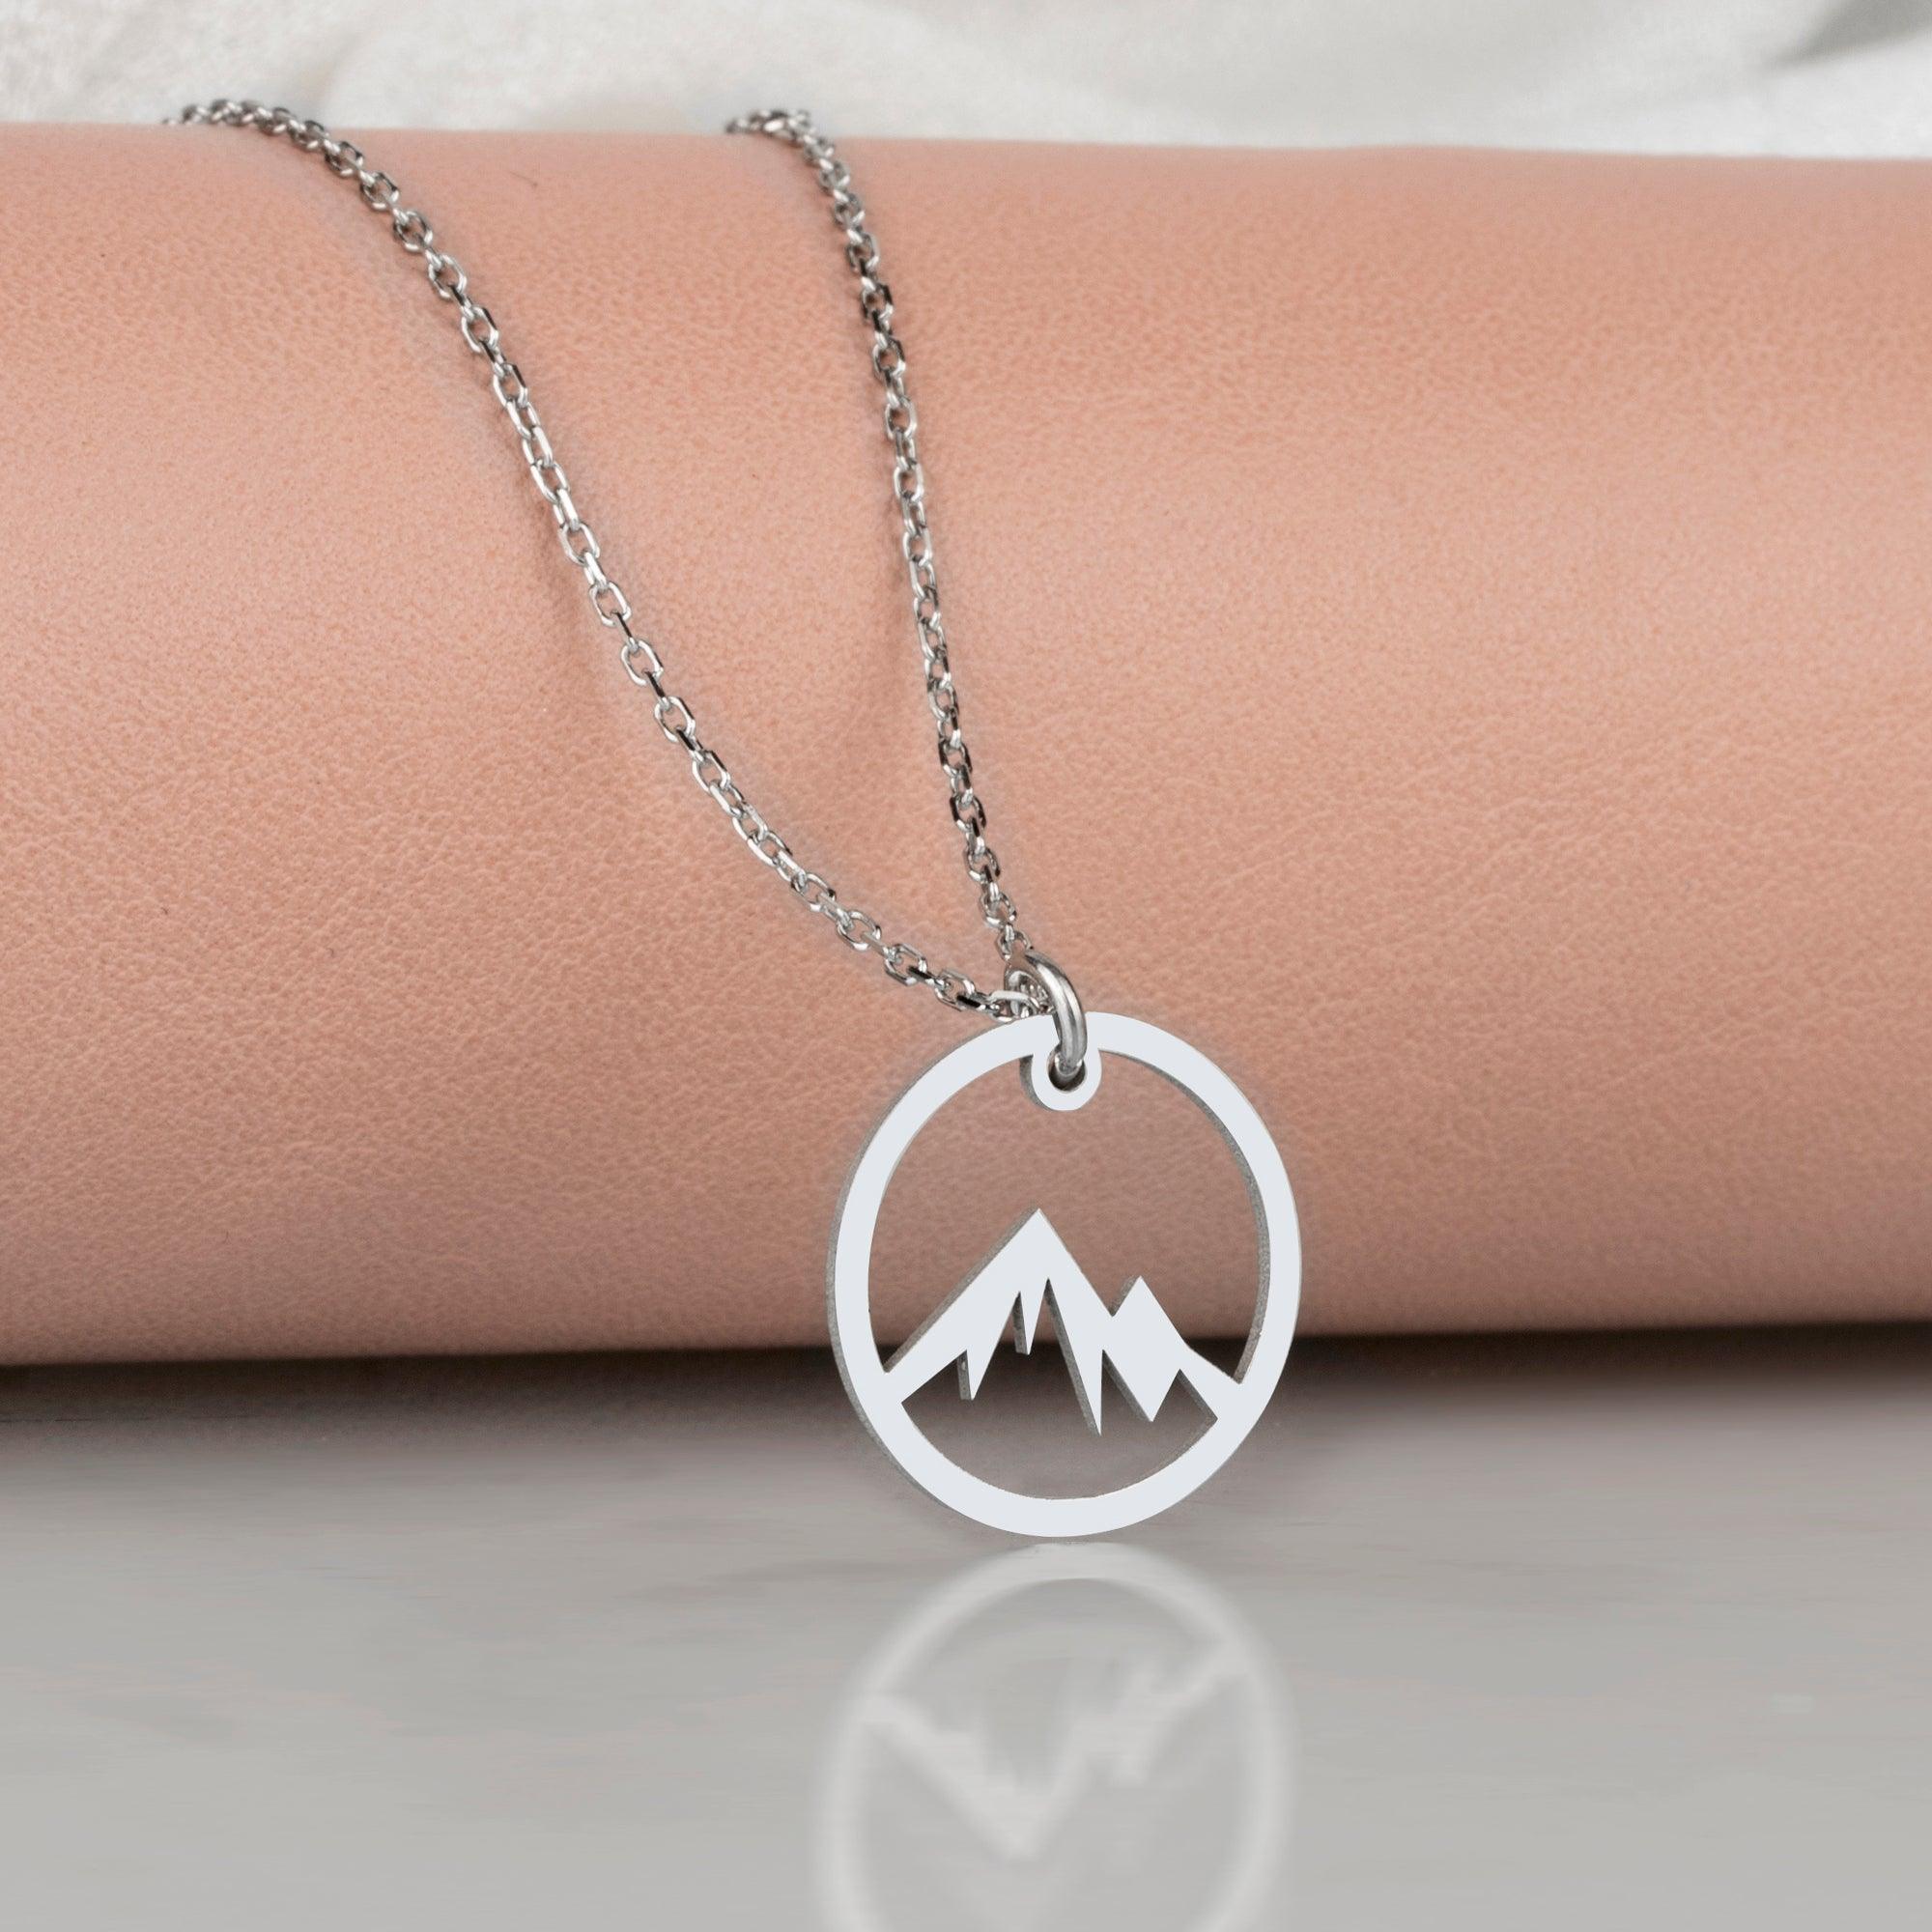 Silver Mountain View Necklace - Whiteface Mtn - Adirondack High Peak –  Spruce Mountain Designs